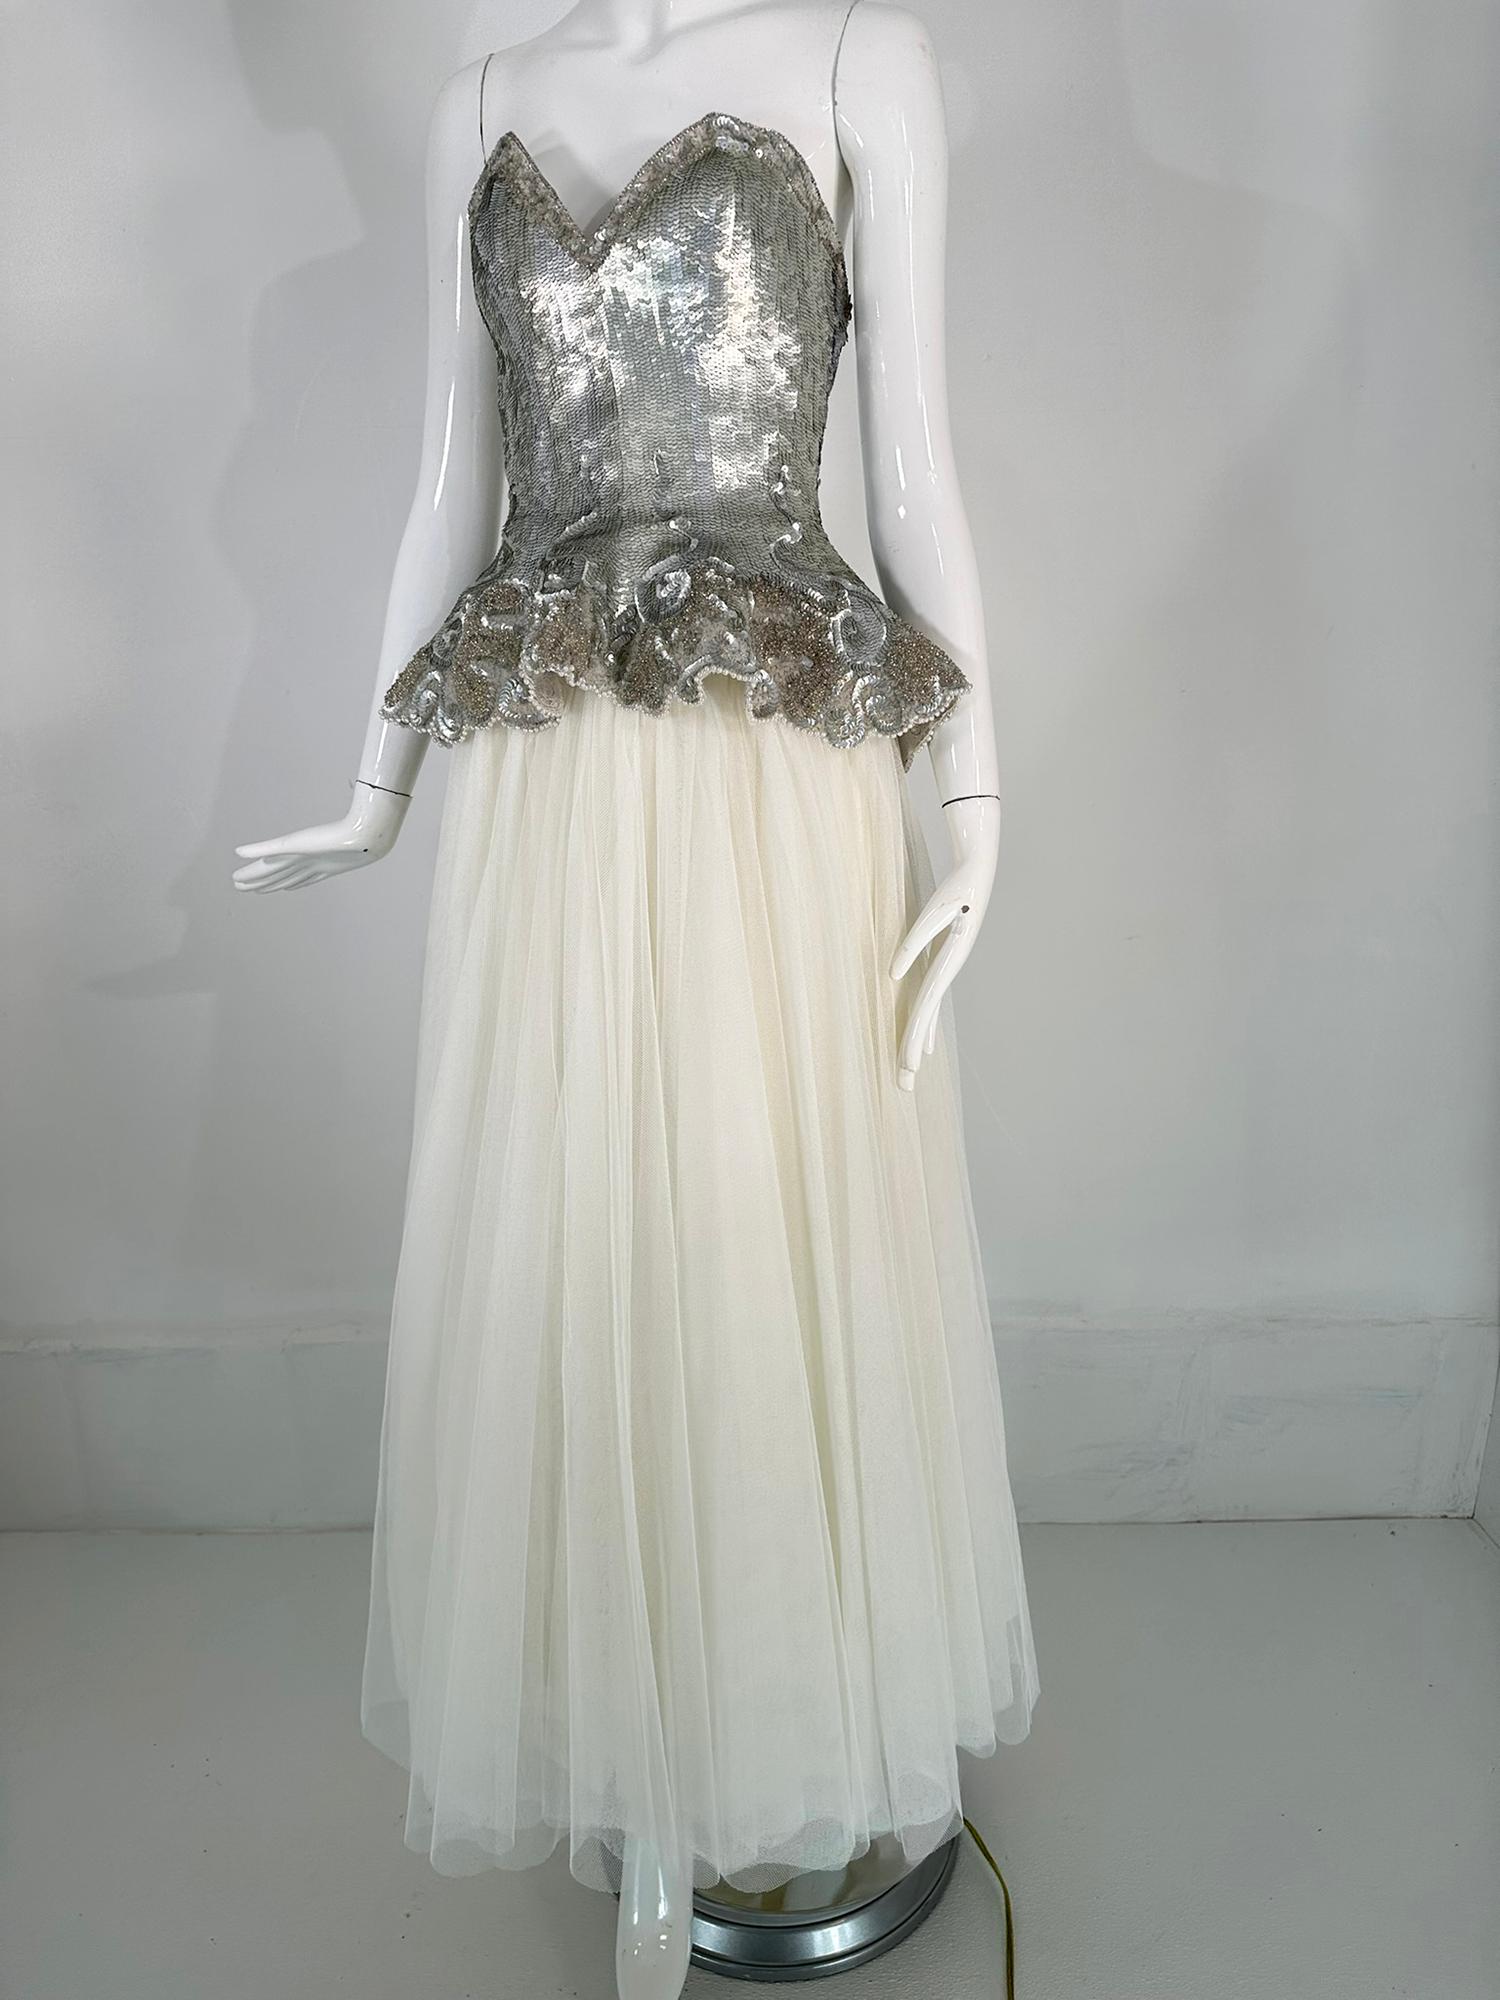 Fabrice Gold & Silver Sequin Peplum Hem Bustier with White Tulle Layered Skirt 9